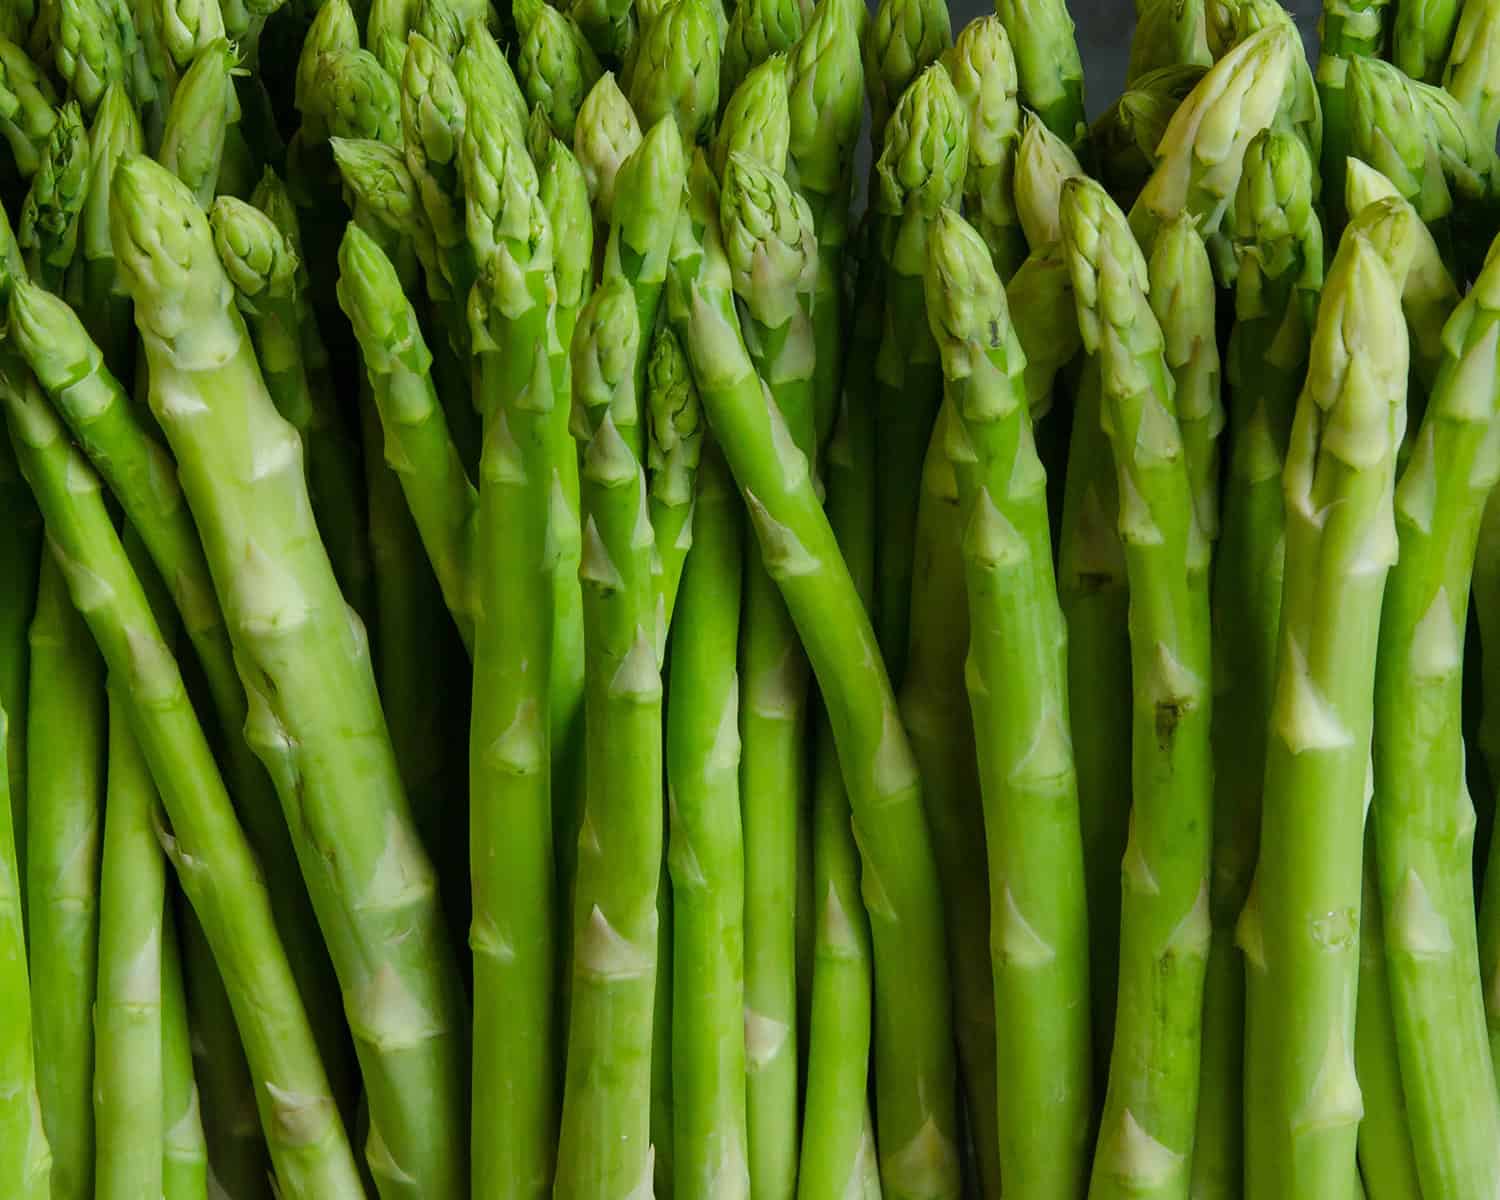 a bunch of asparagus stalks together in a photo.